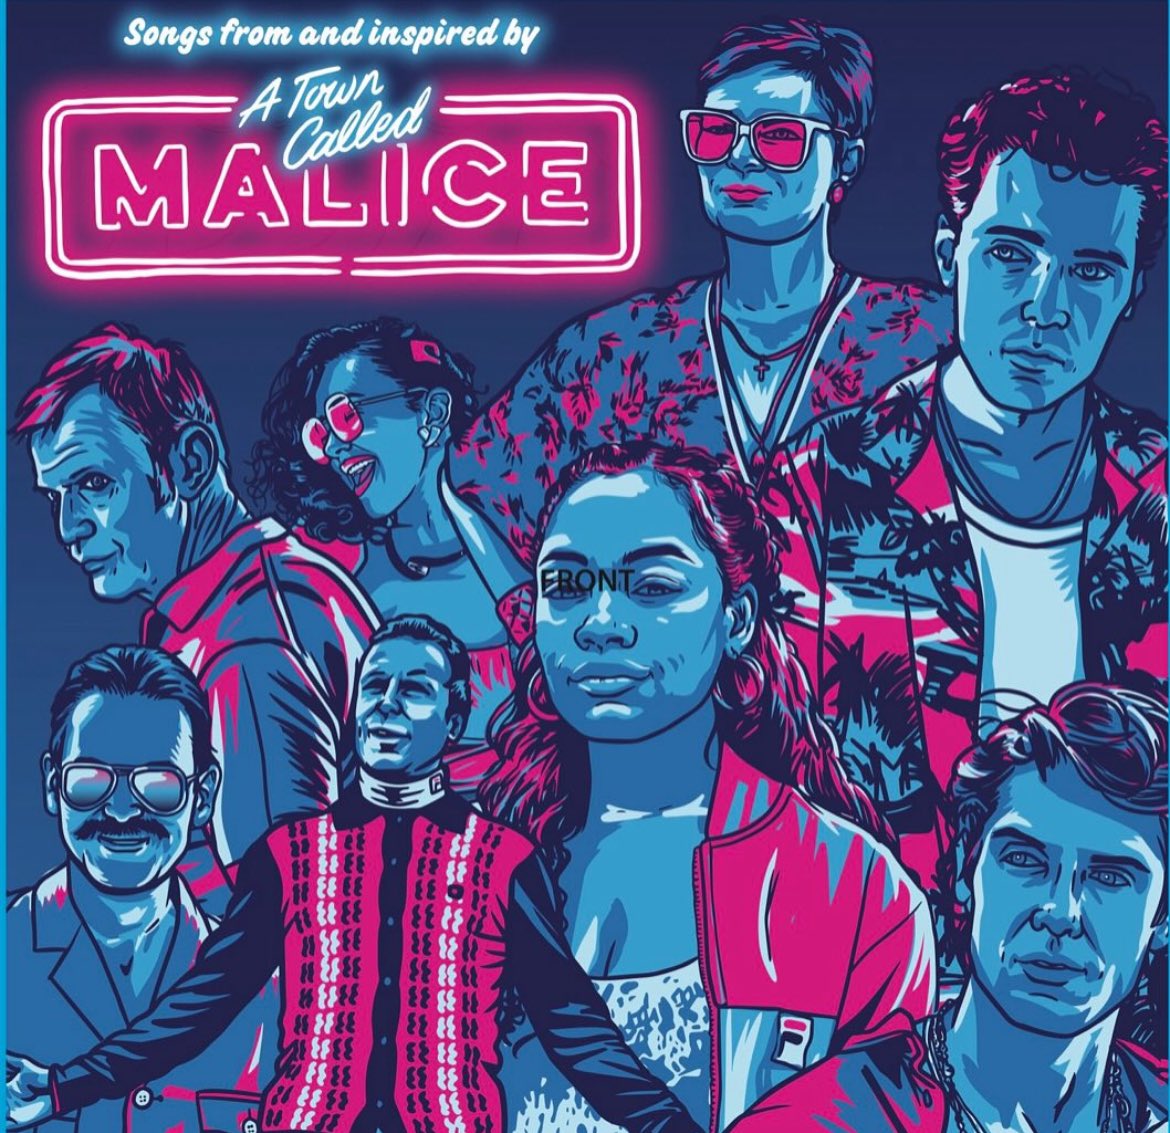 Vinyl Hour. Our very own ‘A Town called Malice’ Soundtrack. Limited to just 250 neon pink vinyl. #theclash #thejam #tearsforfears #theundertones #thespecials etc etc Available on the Homepage. 80scasuals.co.uk